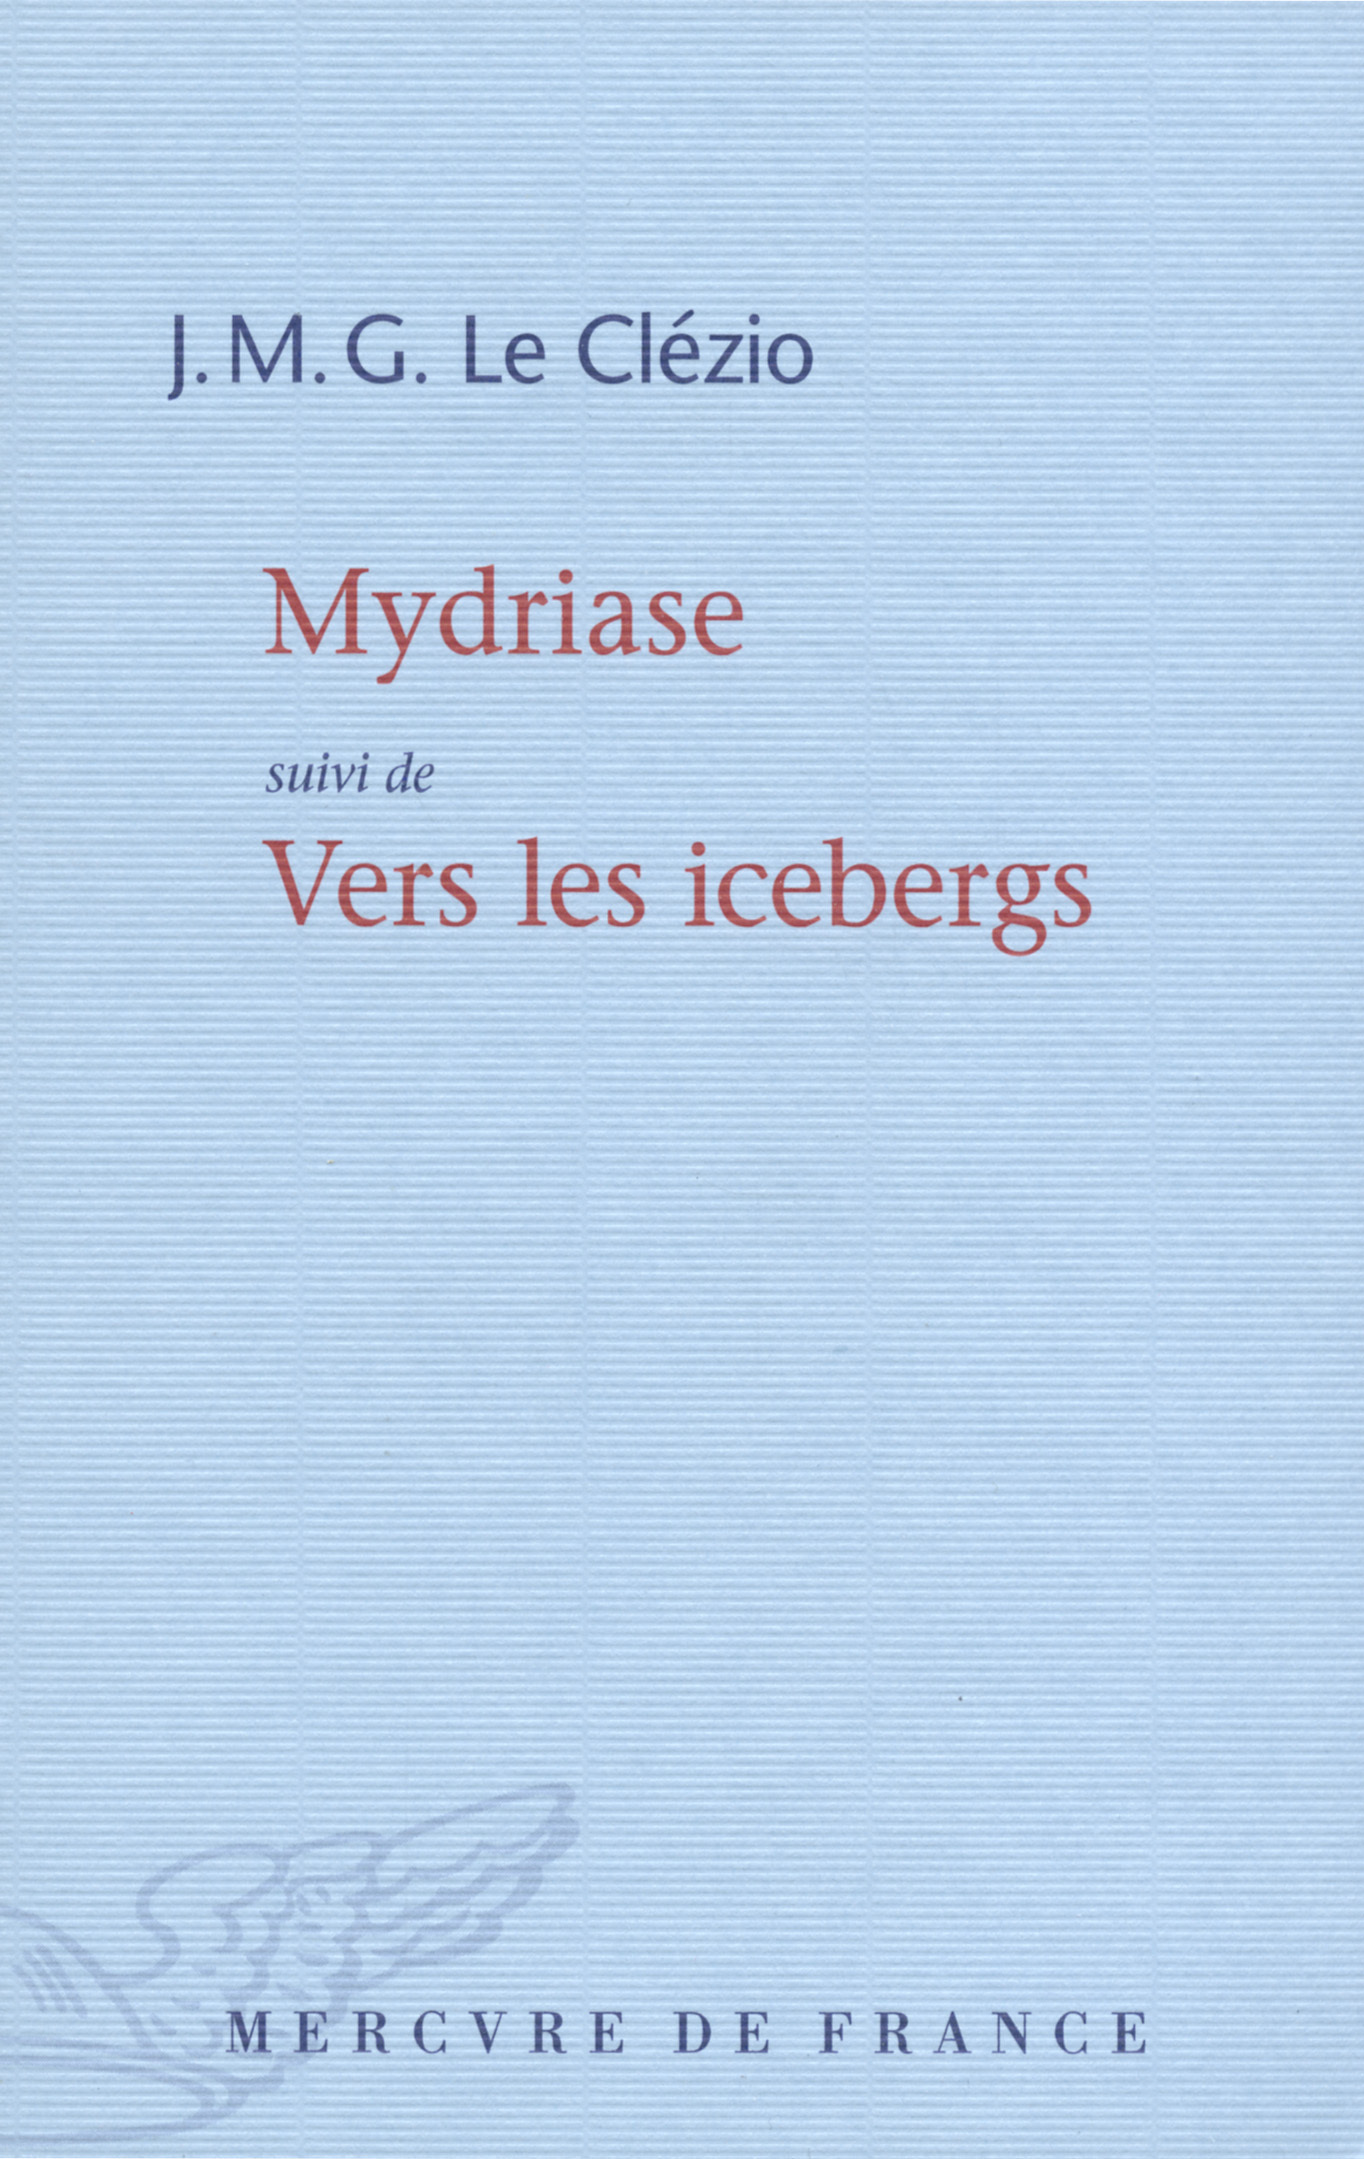 Mydriase / Vers les icebergs (9782715235311-front-cover)